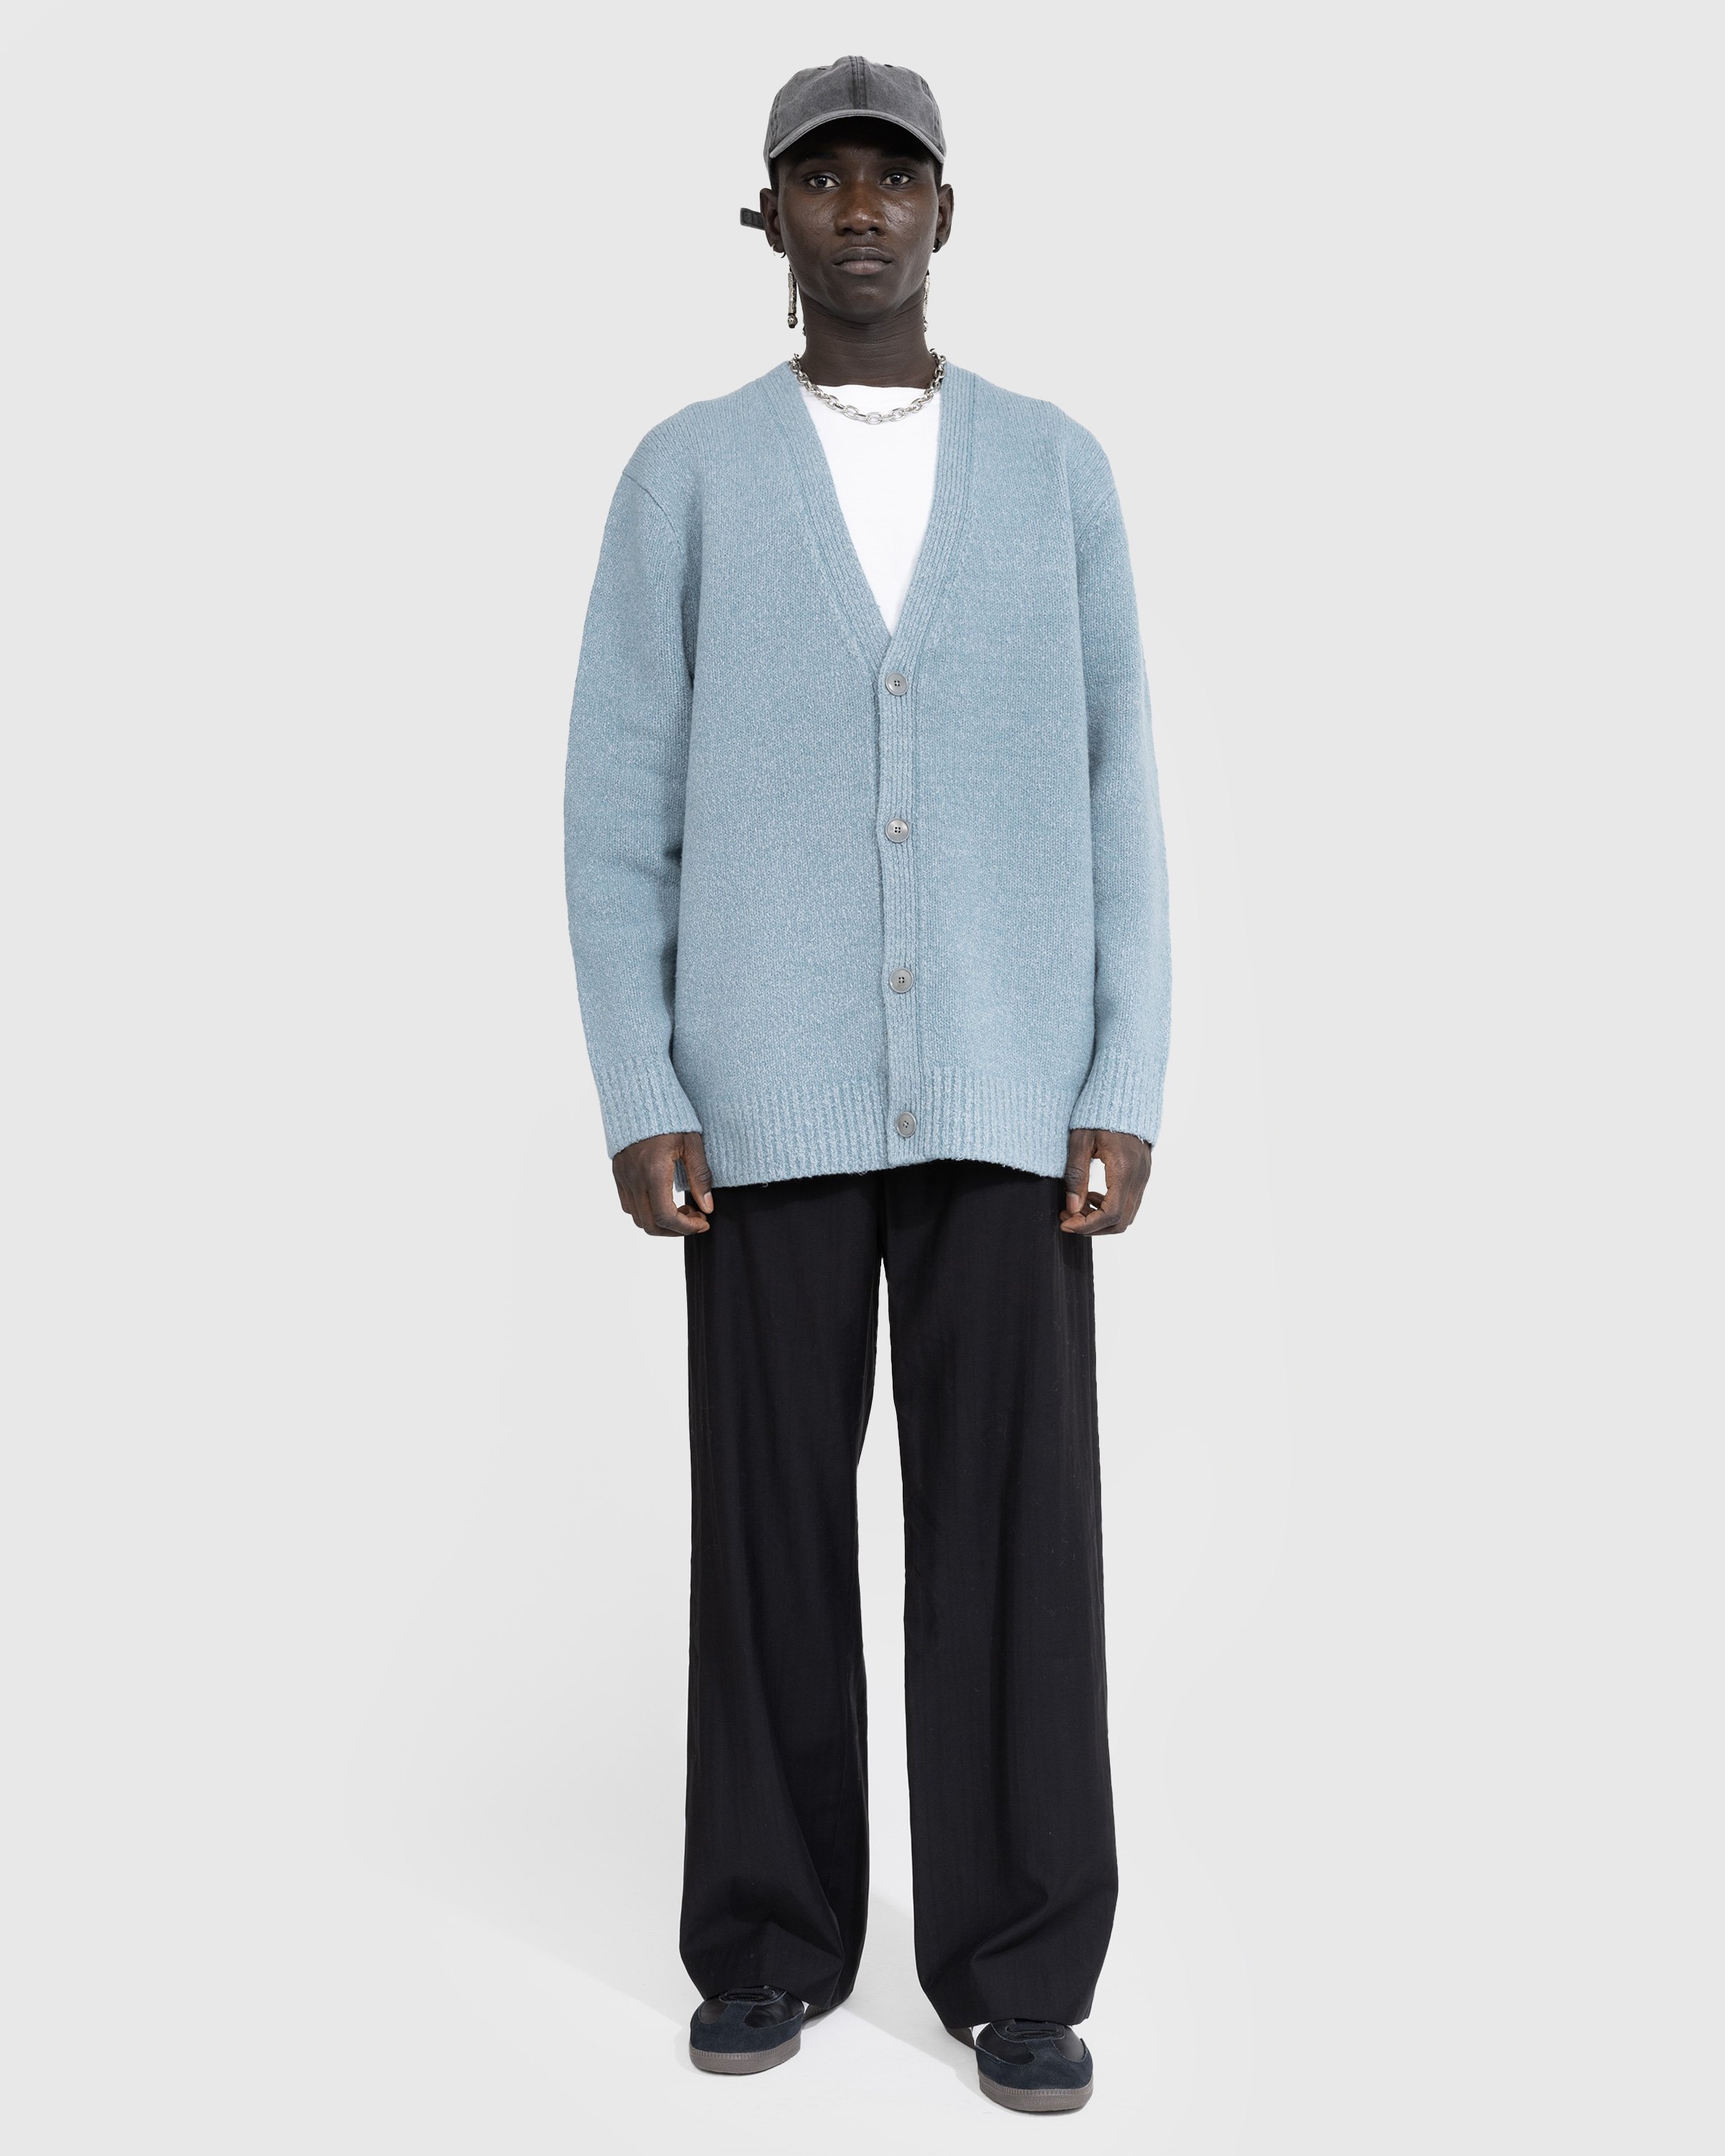 Acne Studios - FN-MN-KNIT000440 - Clothing - Blue - Image 3